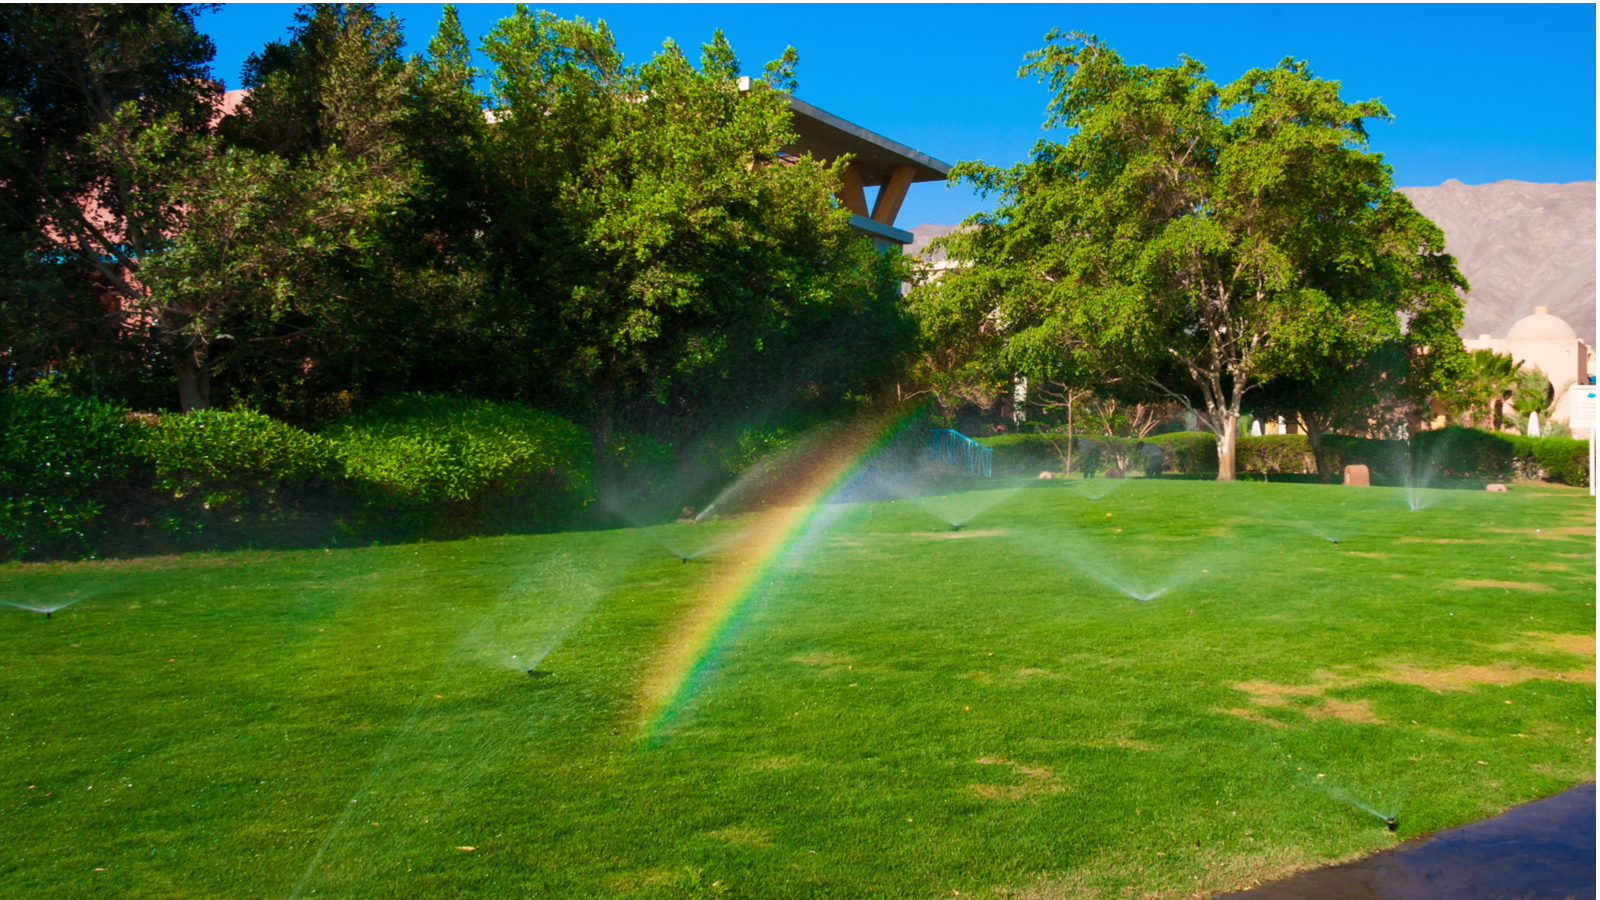 sprinkler-system-startup-Ballwin-MO | Ballwin, MO area sprinkler systems | Lawn Sprinklers of St. Louis